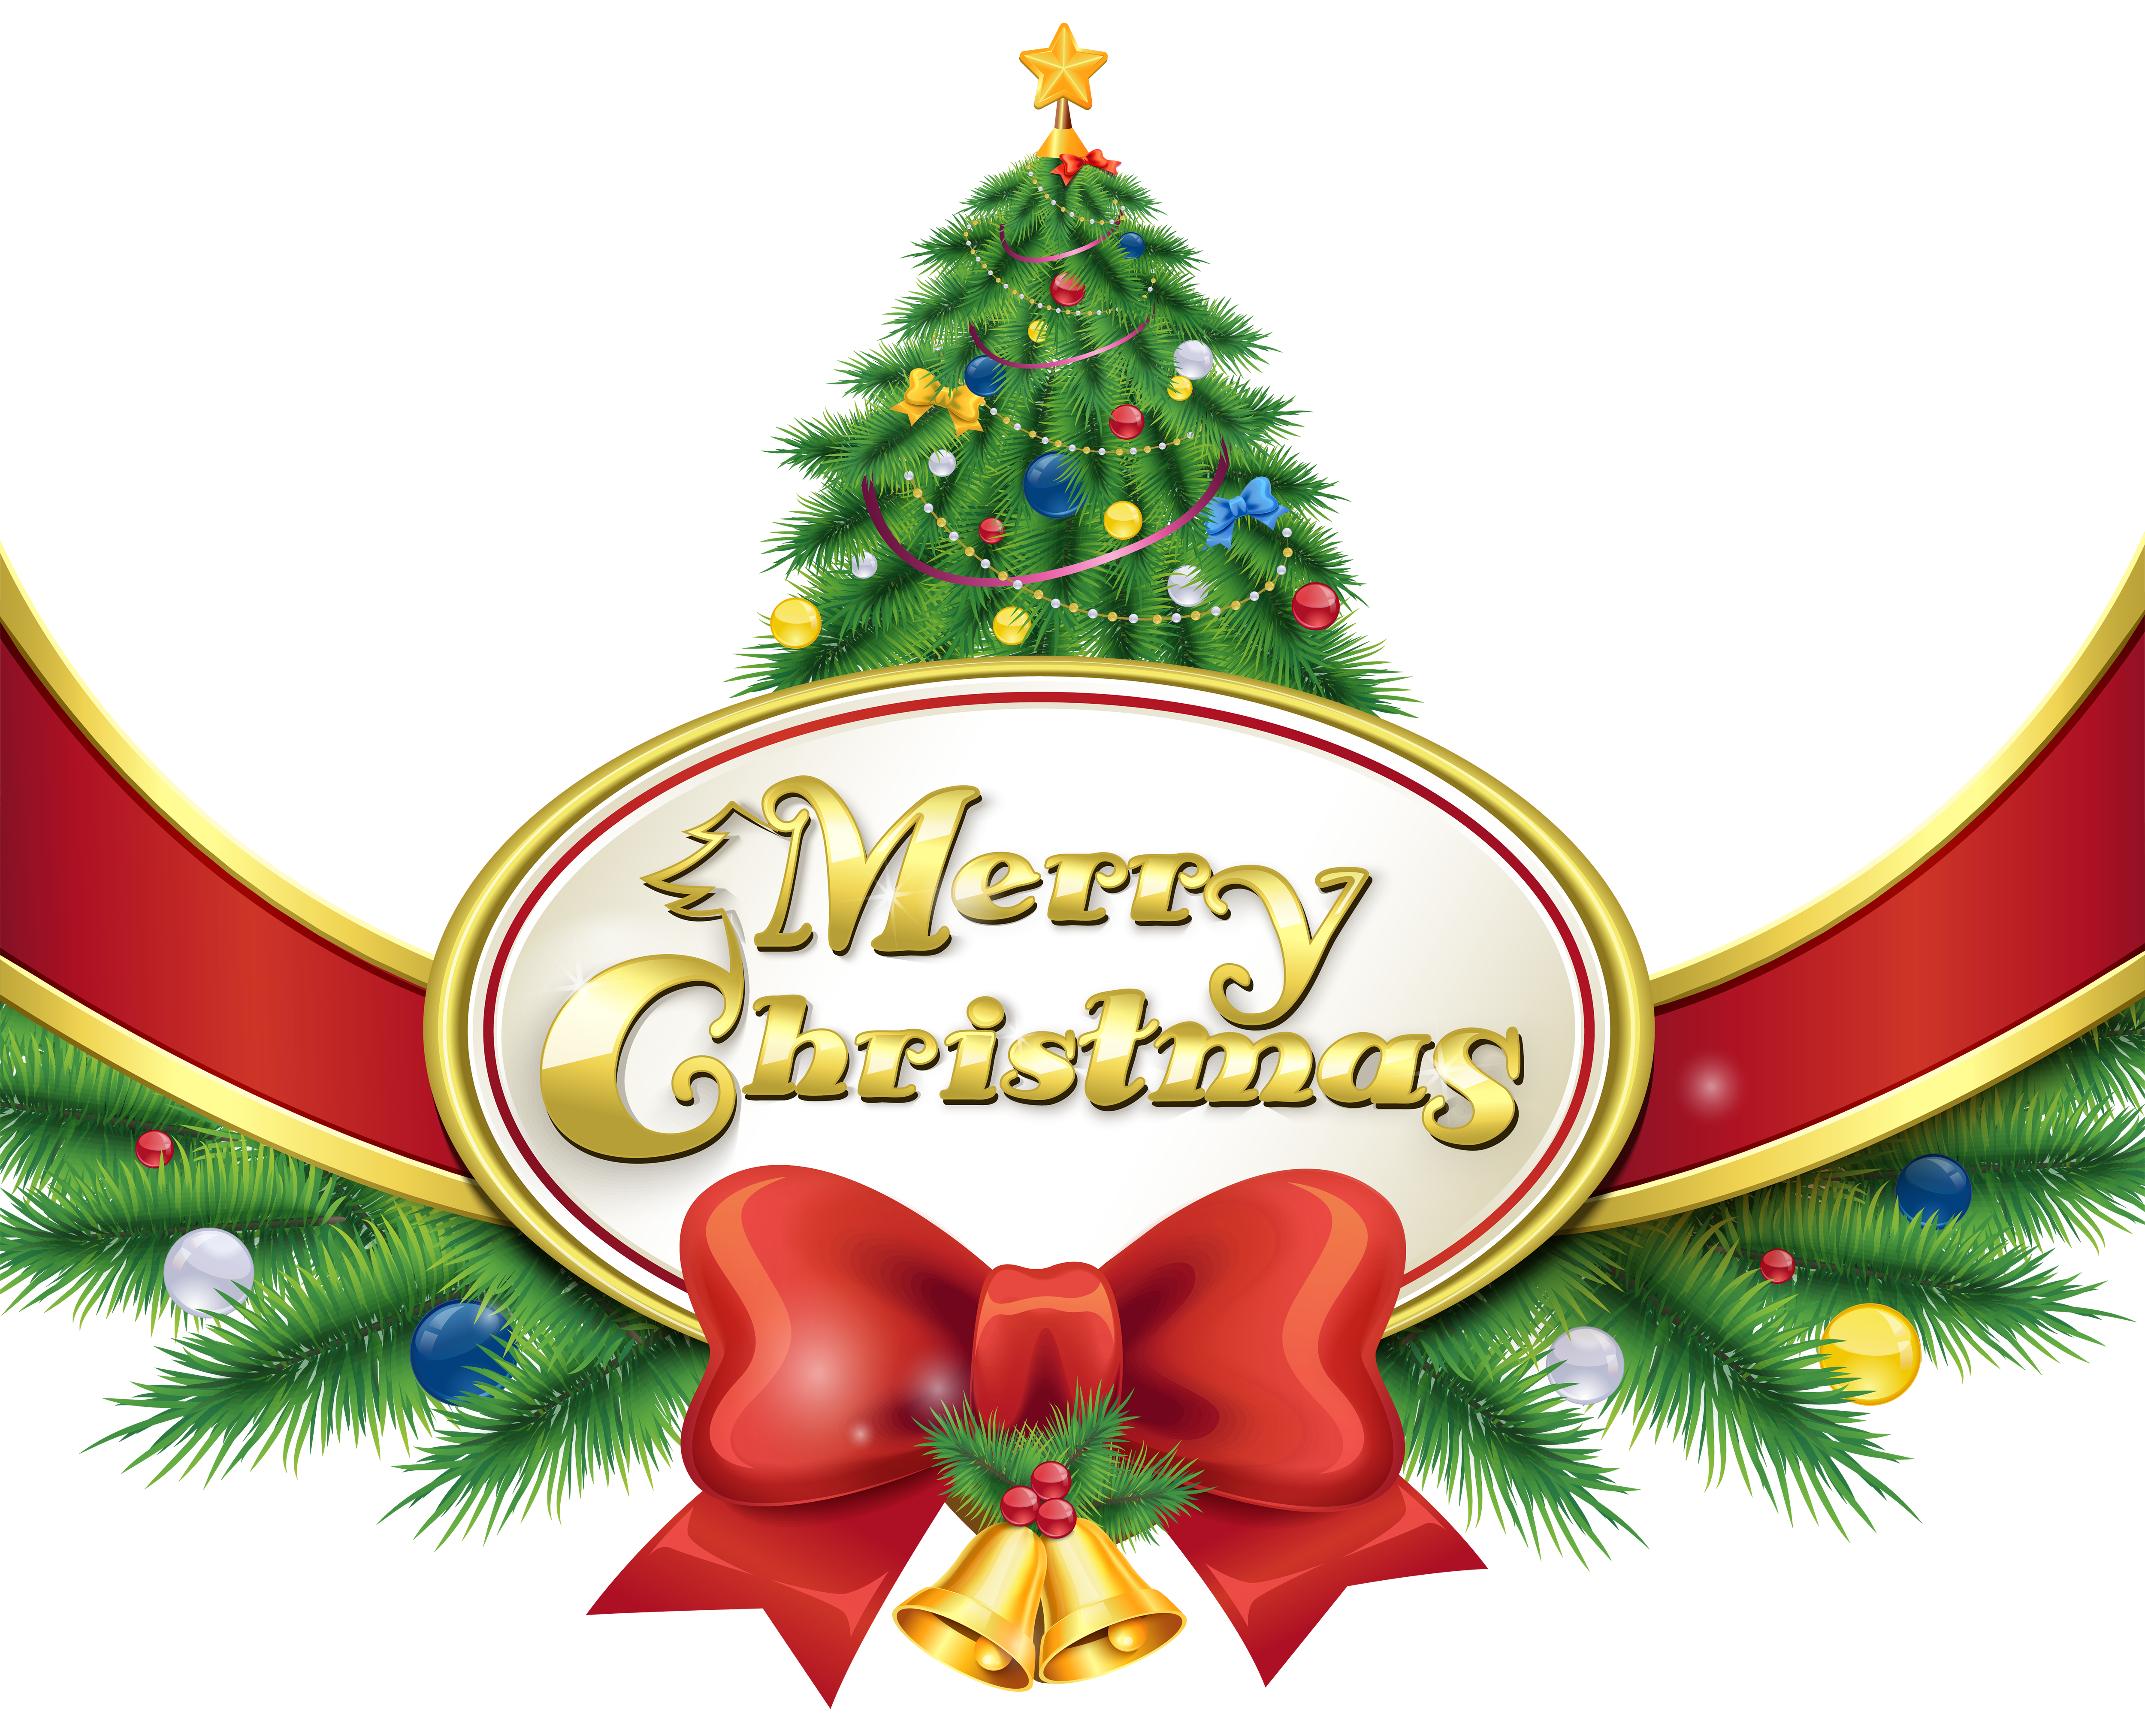 Merry Christmas Clipart Images | Free download on ClipArtMag